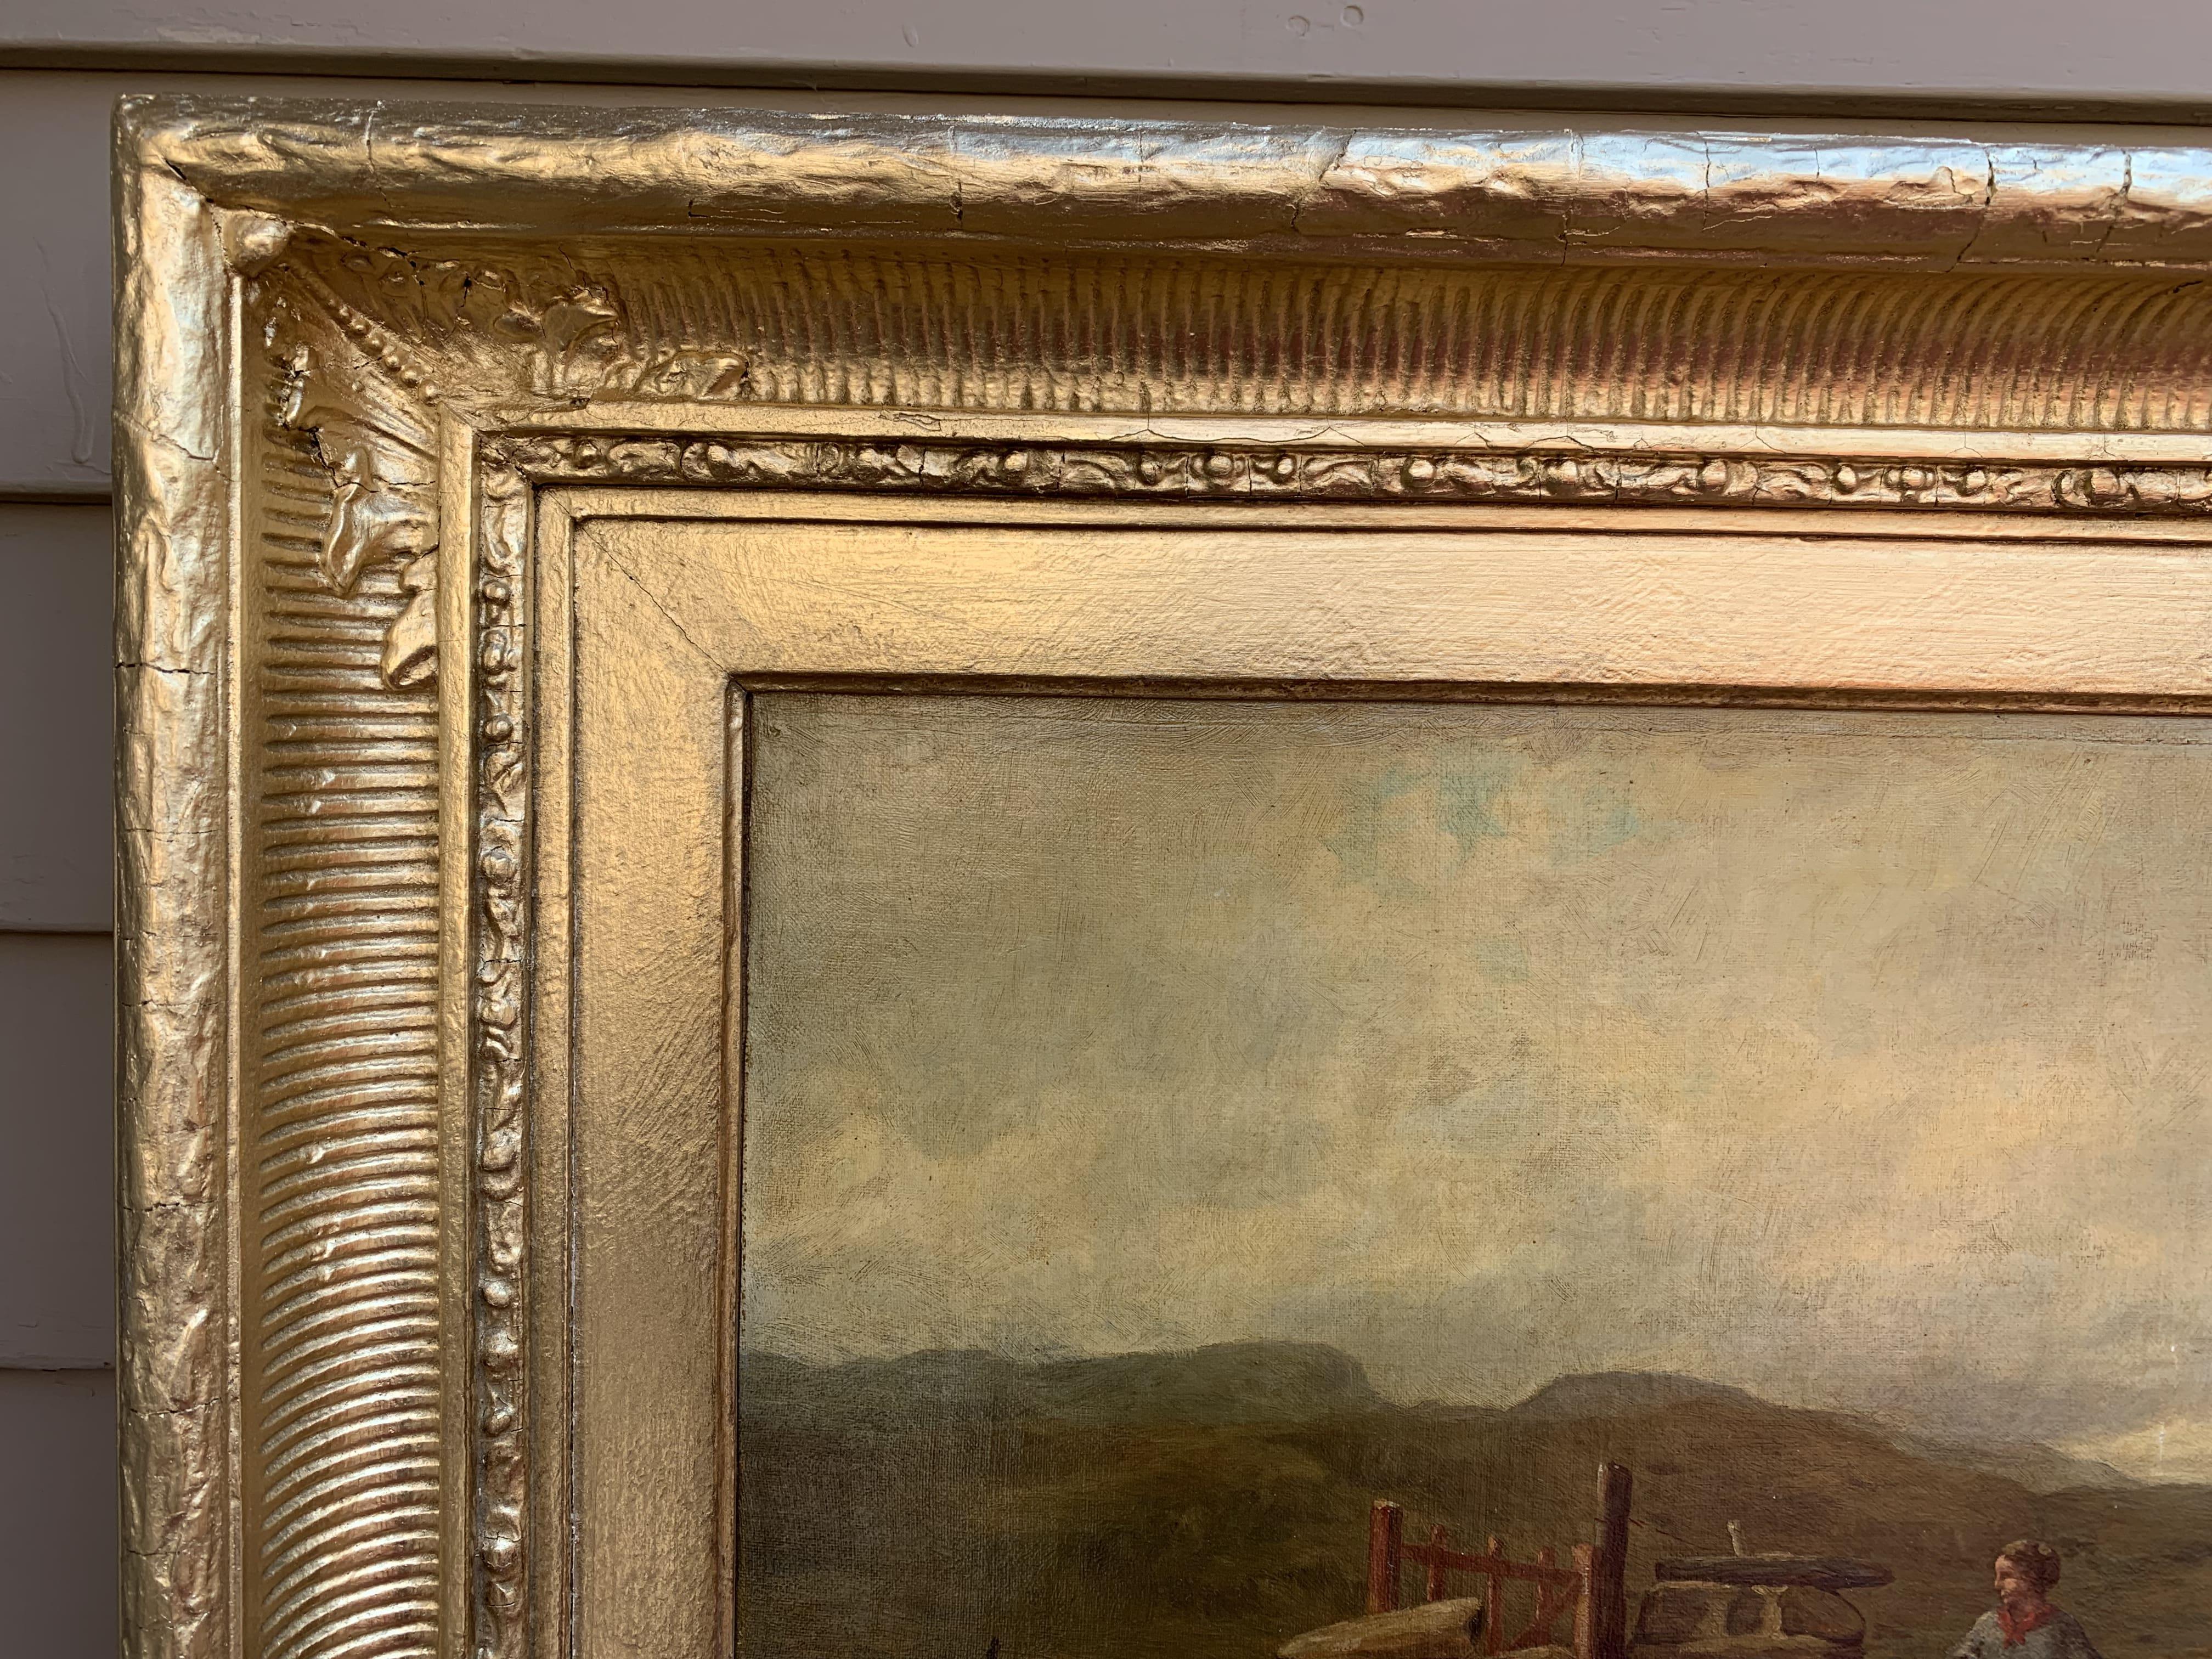 This is an original antique oil painting on canvas depicting a country landscape with a Woman and Ducks.  

Signed and dated 1876 in the lower left by listed Artist George Whitton Johnstone (British, 1849-1901)

Presented in the antique gold frame.